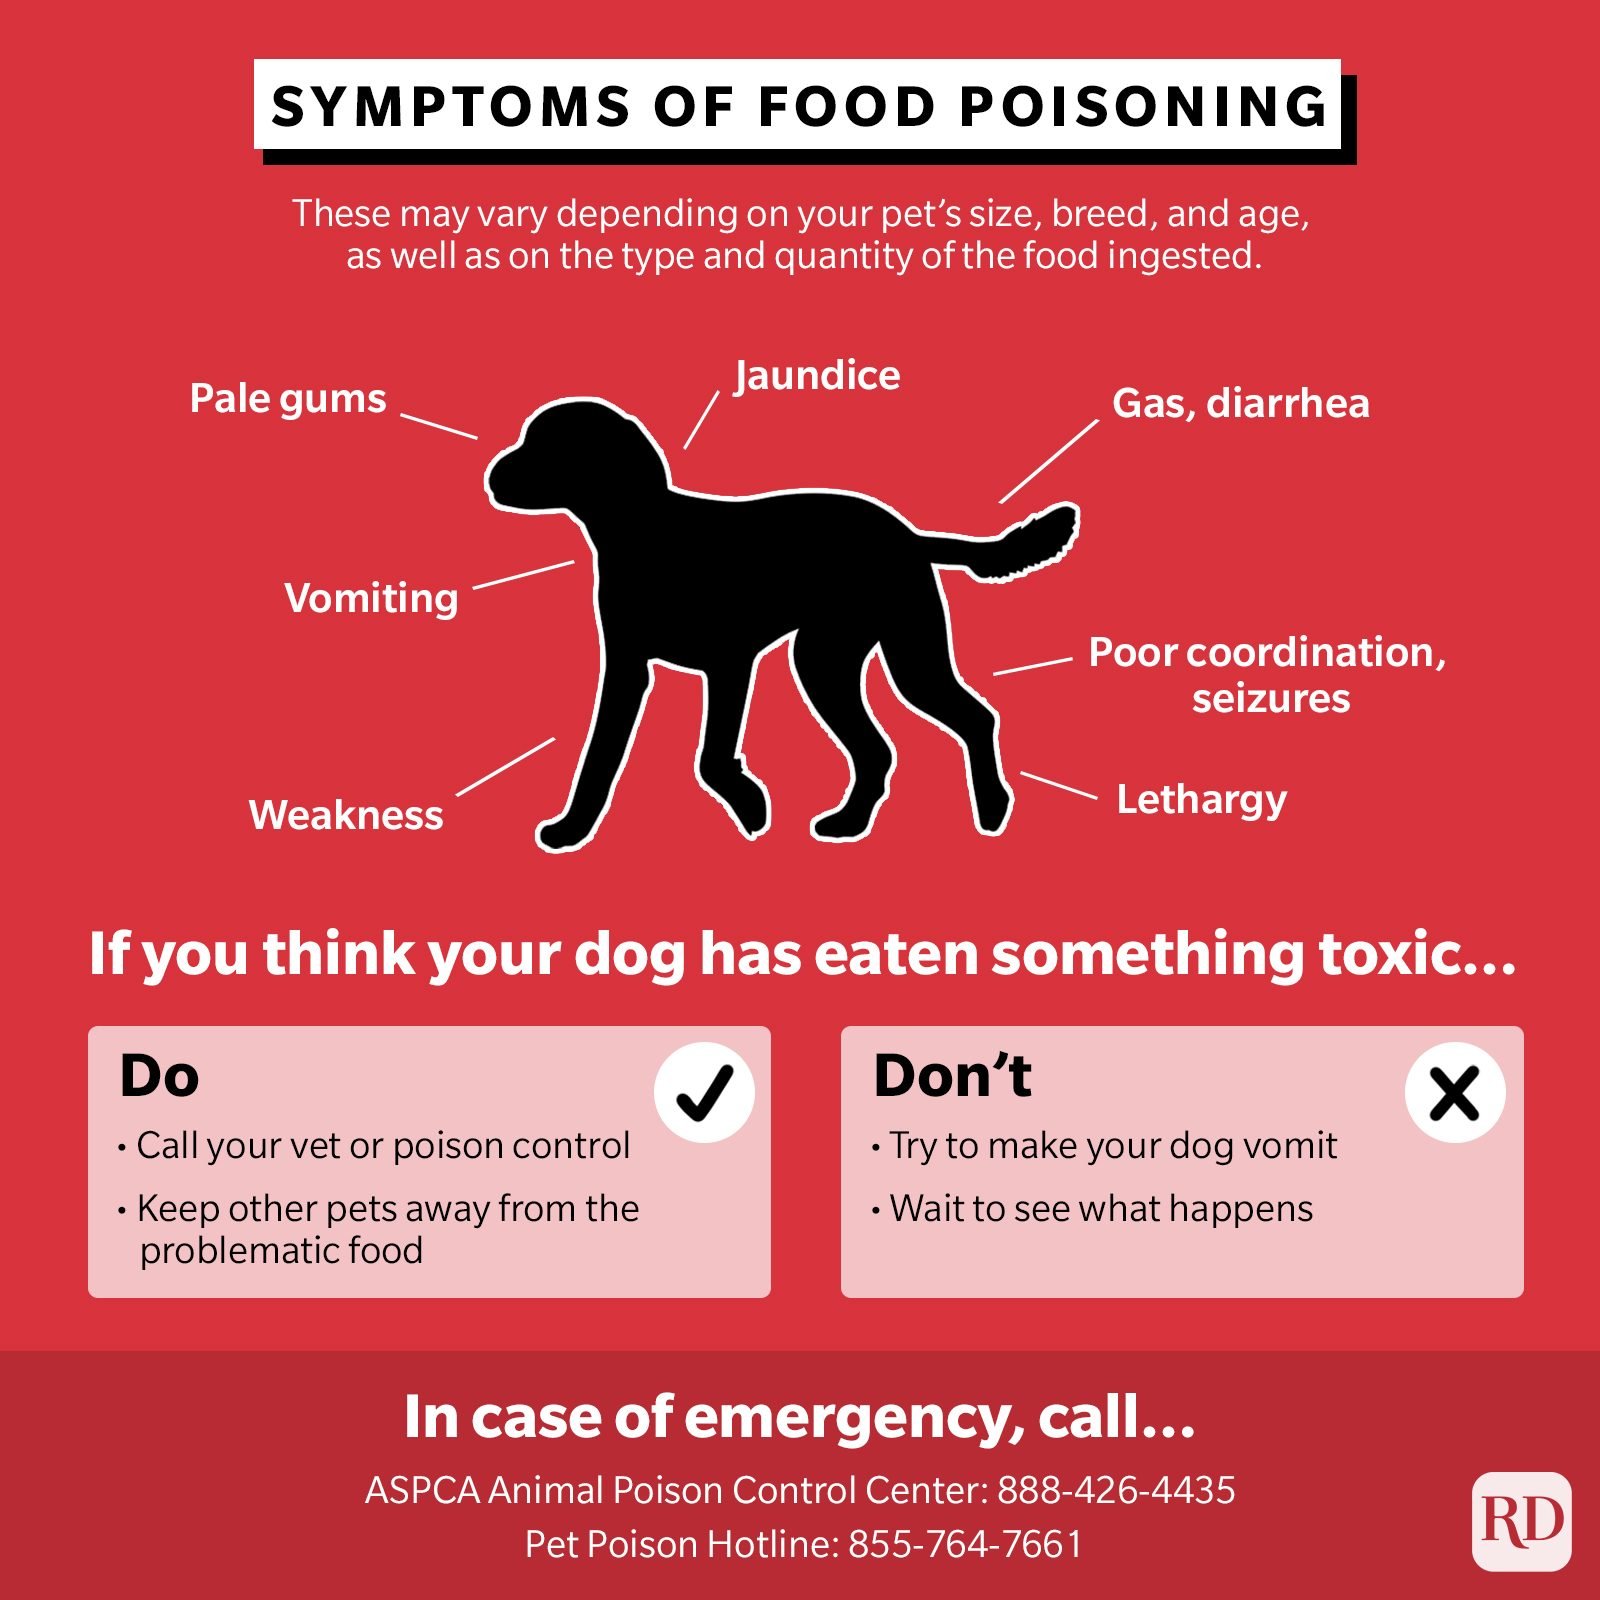 Symptoms of food poisoning and what to do when your dog may have ingested a dangerous food